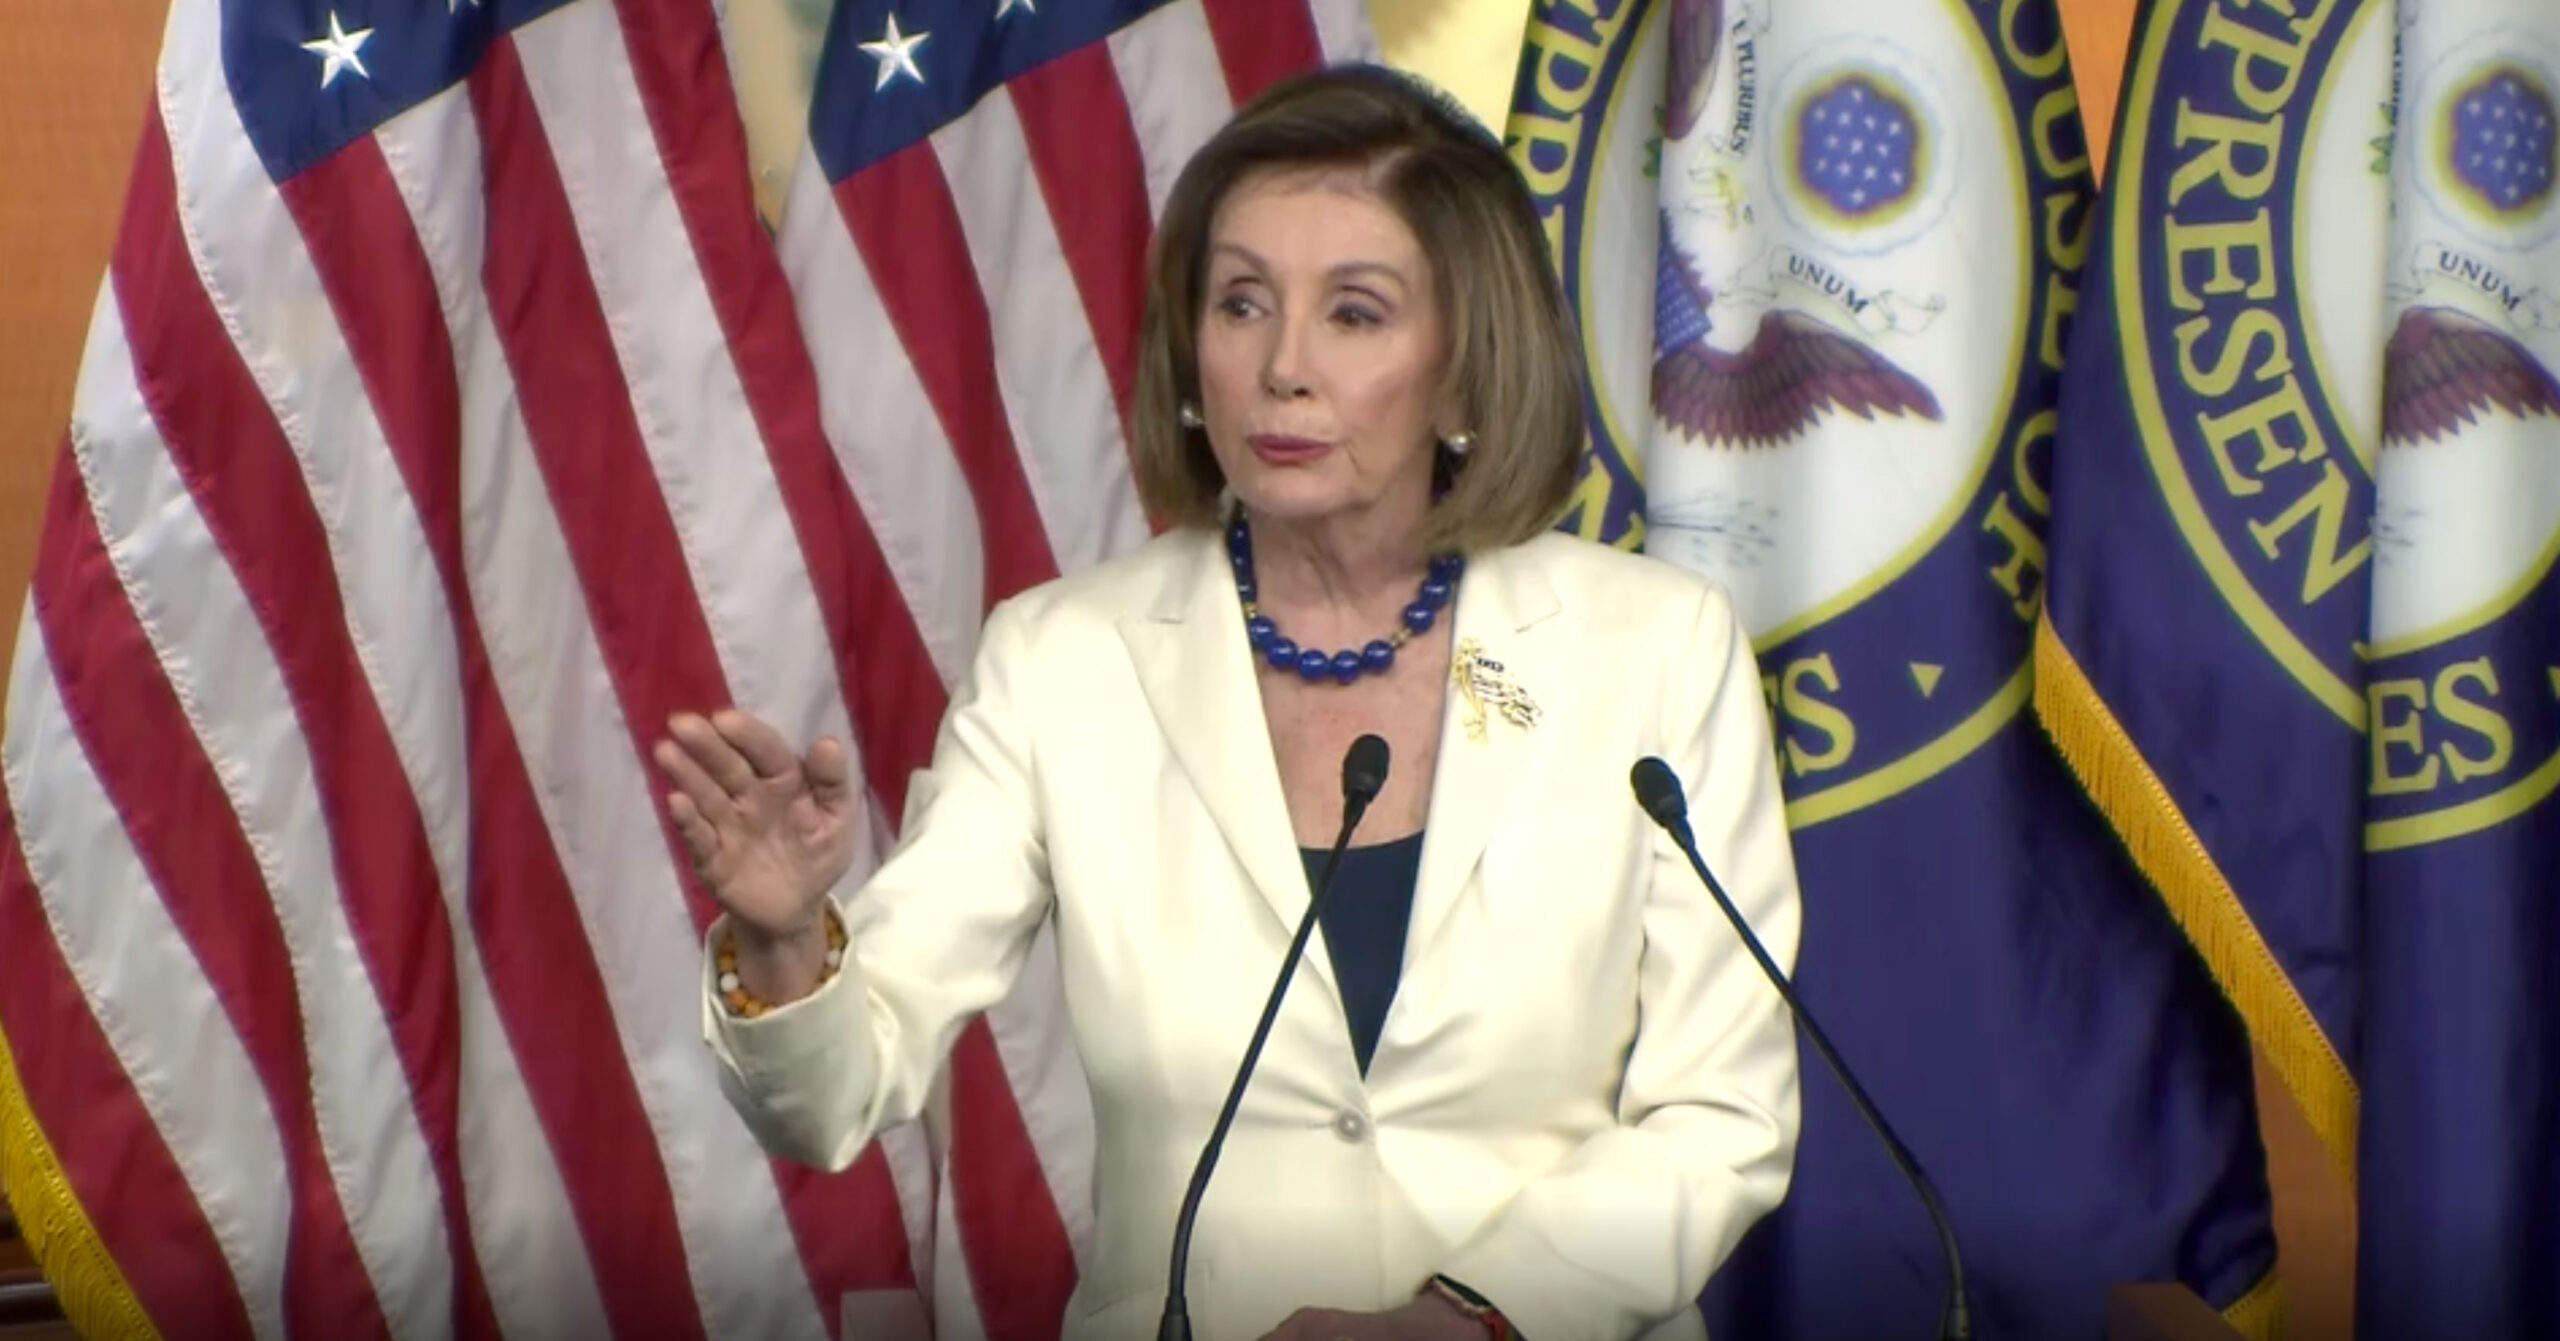 Pelosi Clashes With Reporter – Admits She Shifted To Supporting Relief